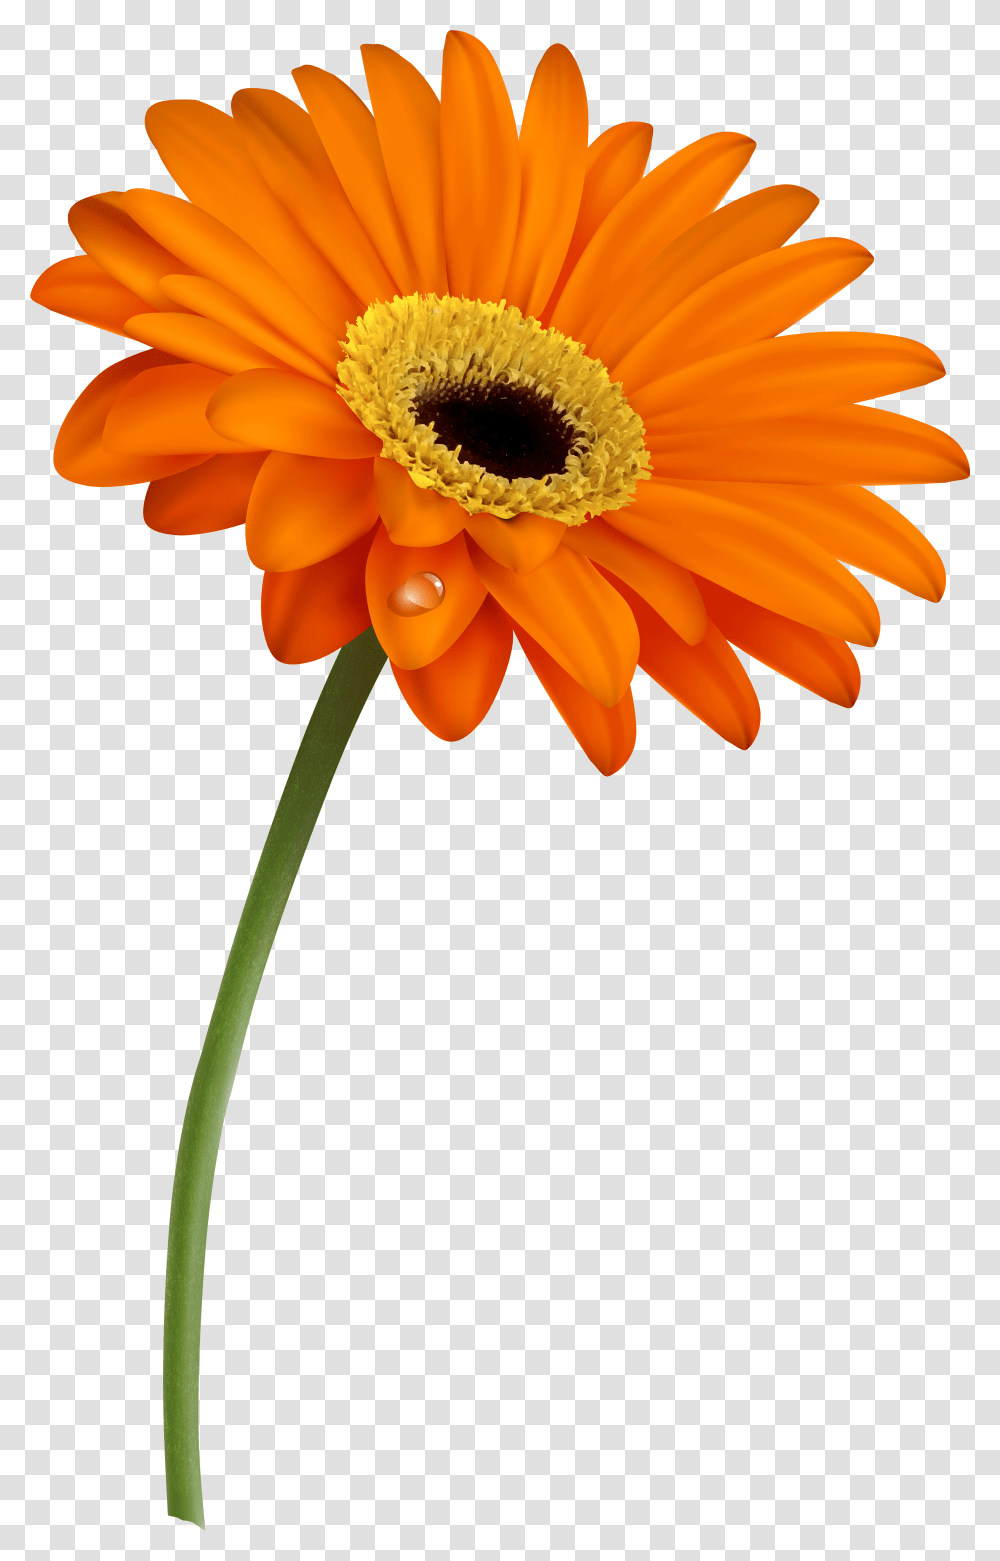 Grass With Flowers And Butterfly Cartoons Gerbera Daisy Clipart, Plant, Blossom, Daisies, Pollen Transparent Png